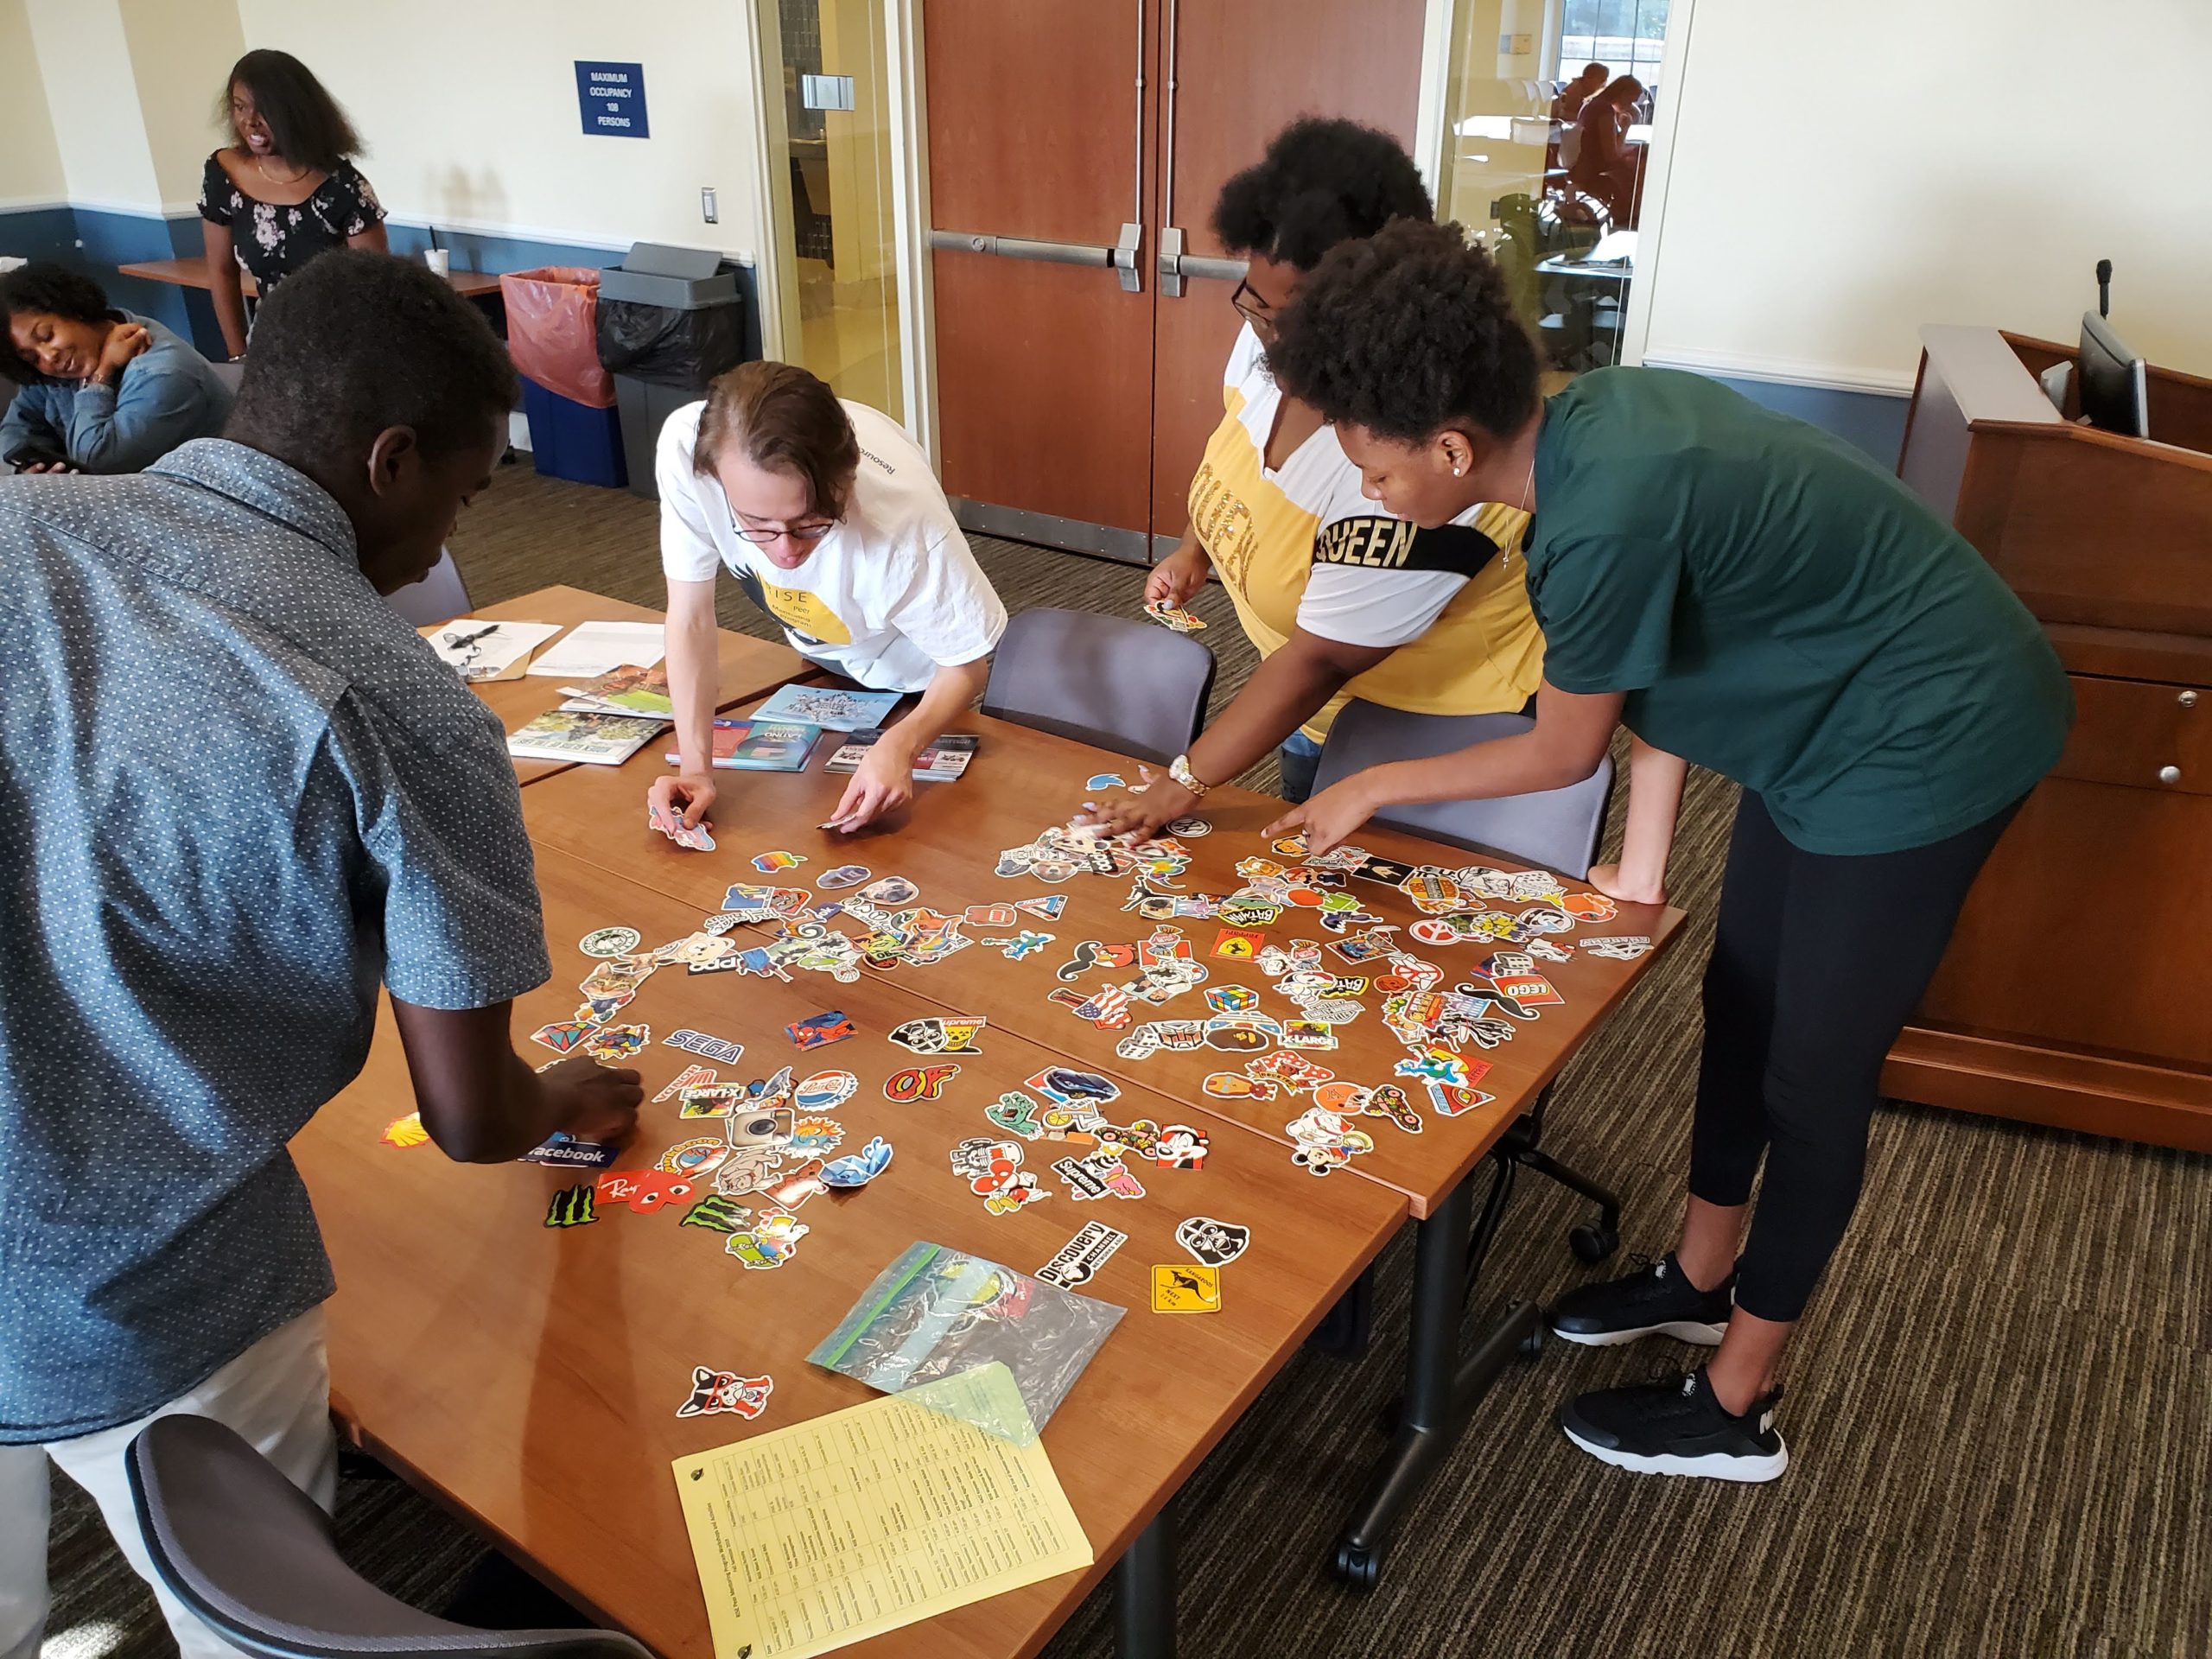 A group of RISE students choosing their favorite stickers from a collection